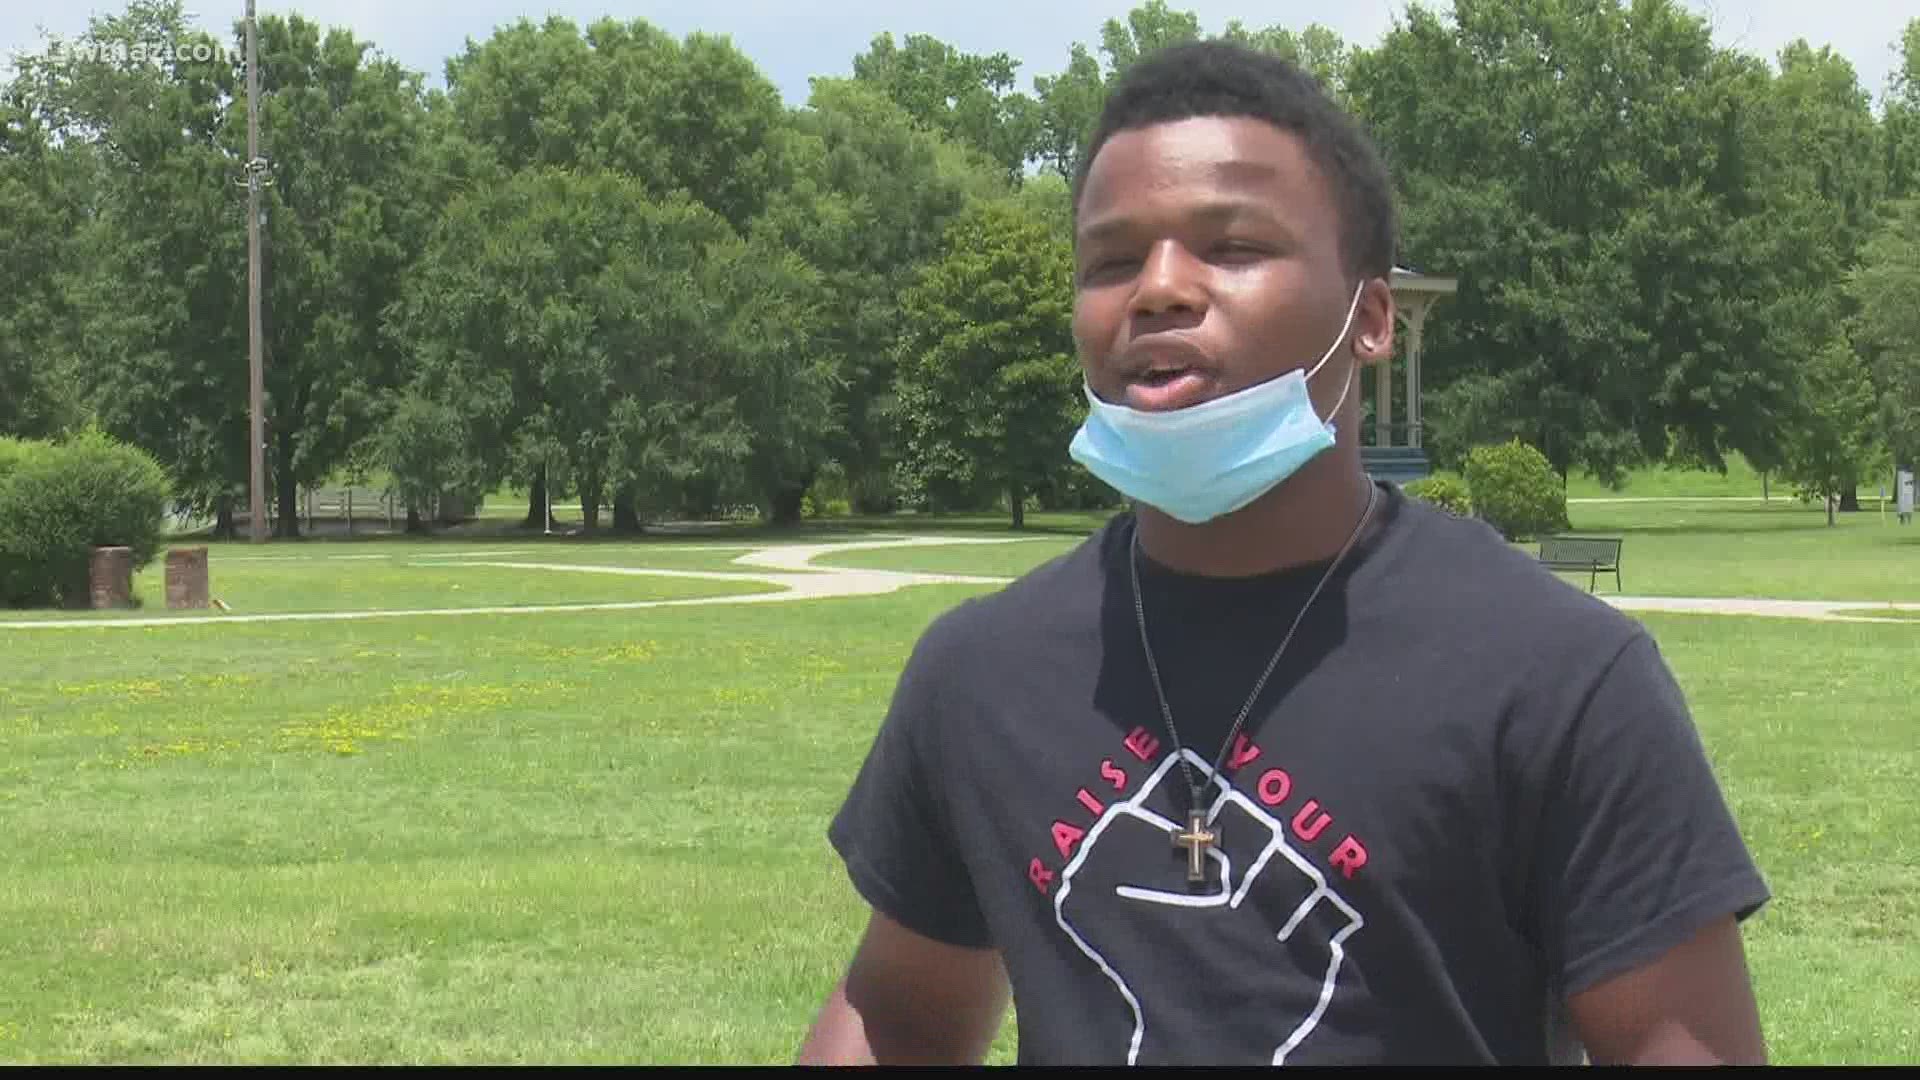 Mckinlee Hall is 14 years old and from Macon. He has started his own organization to support the less-fortunate.